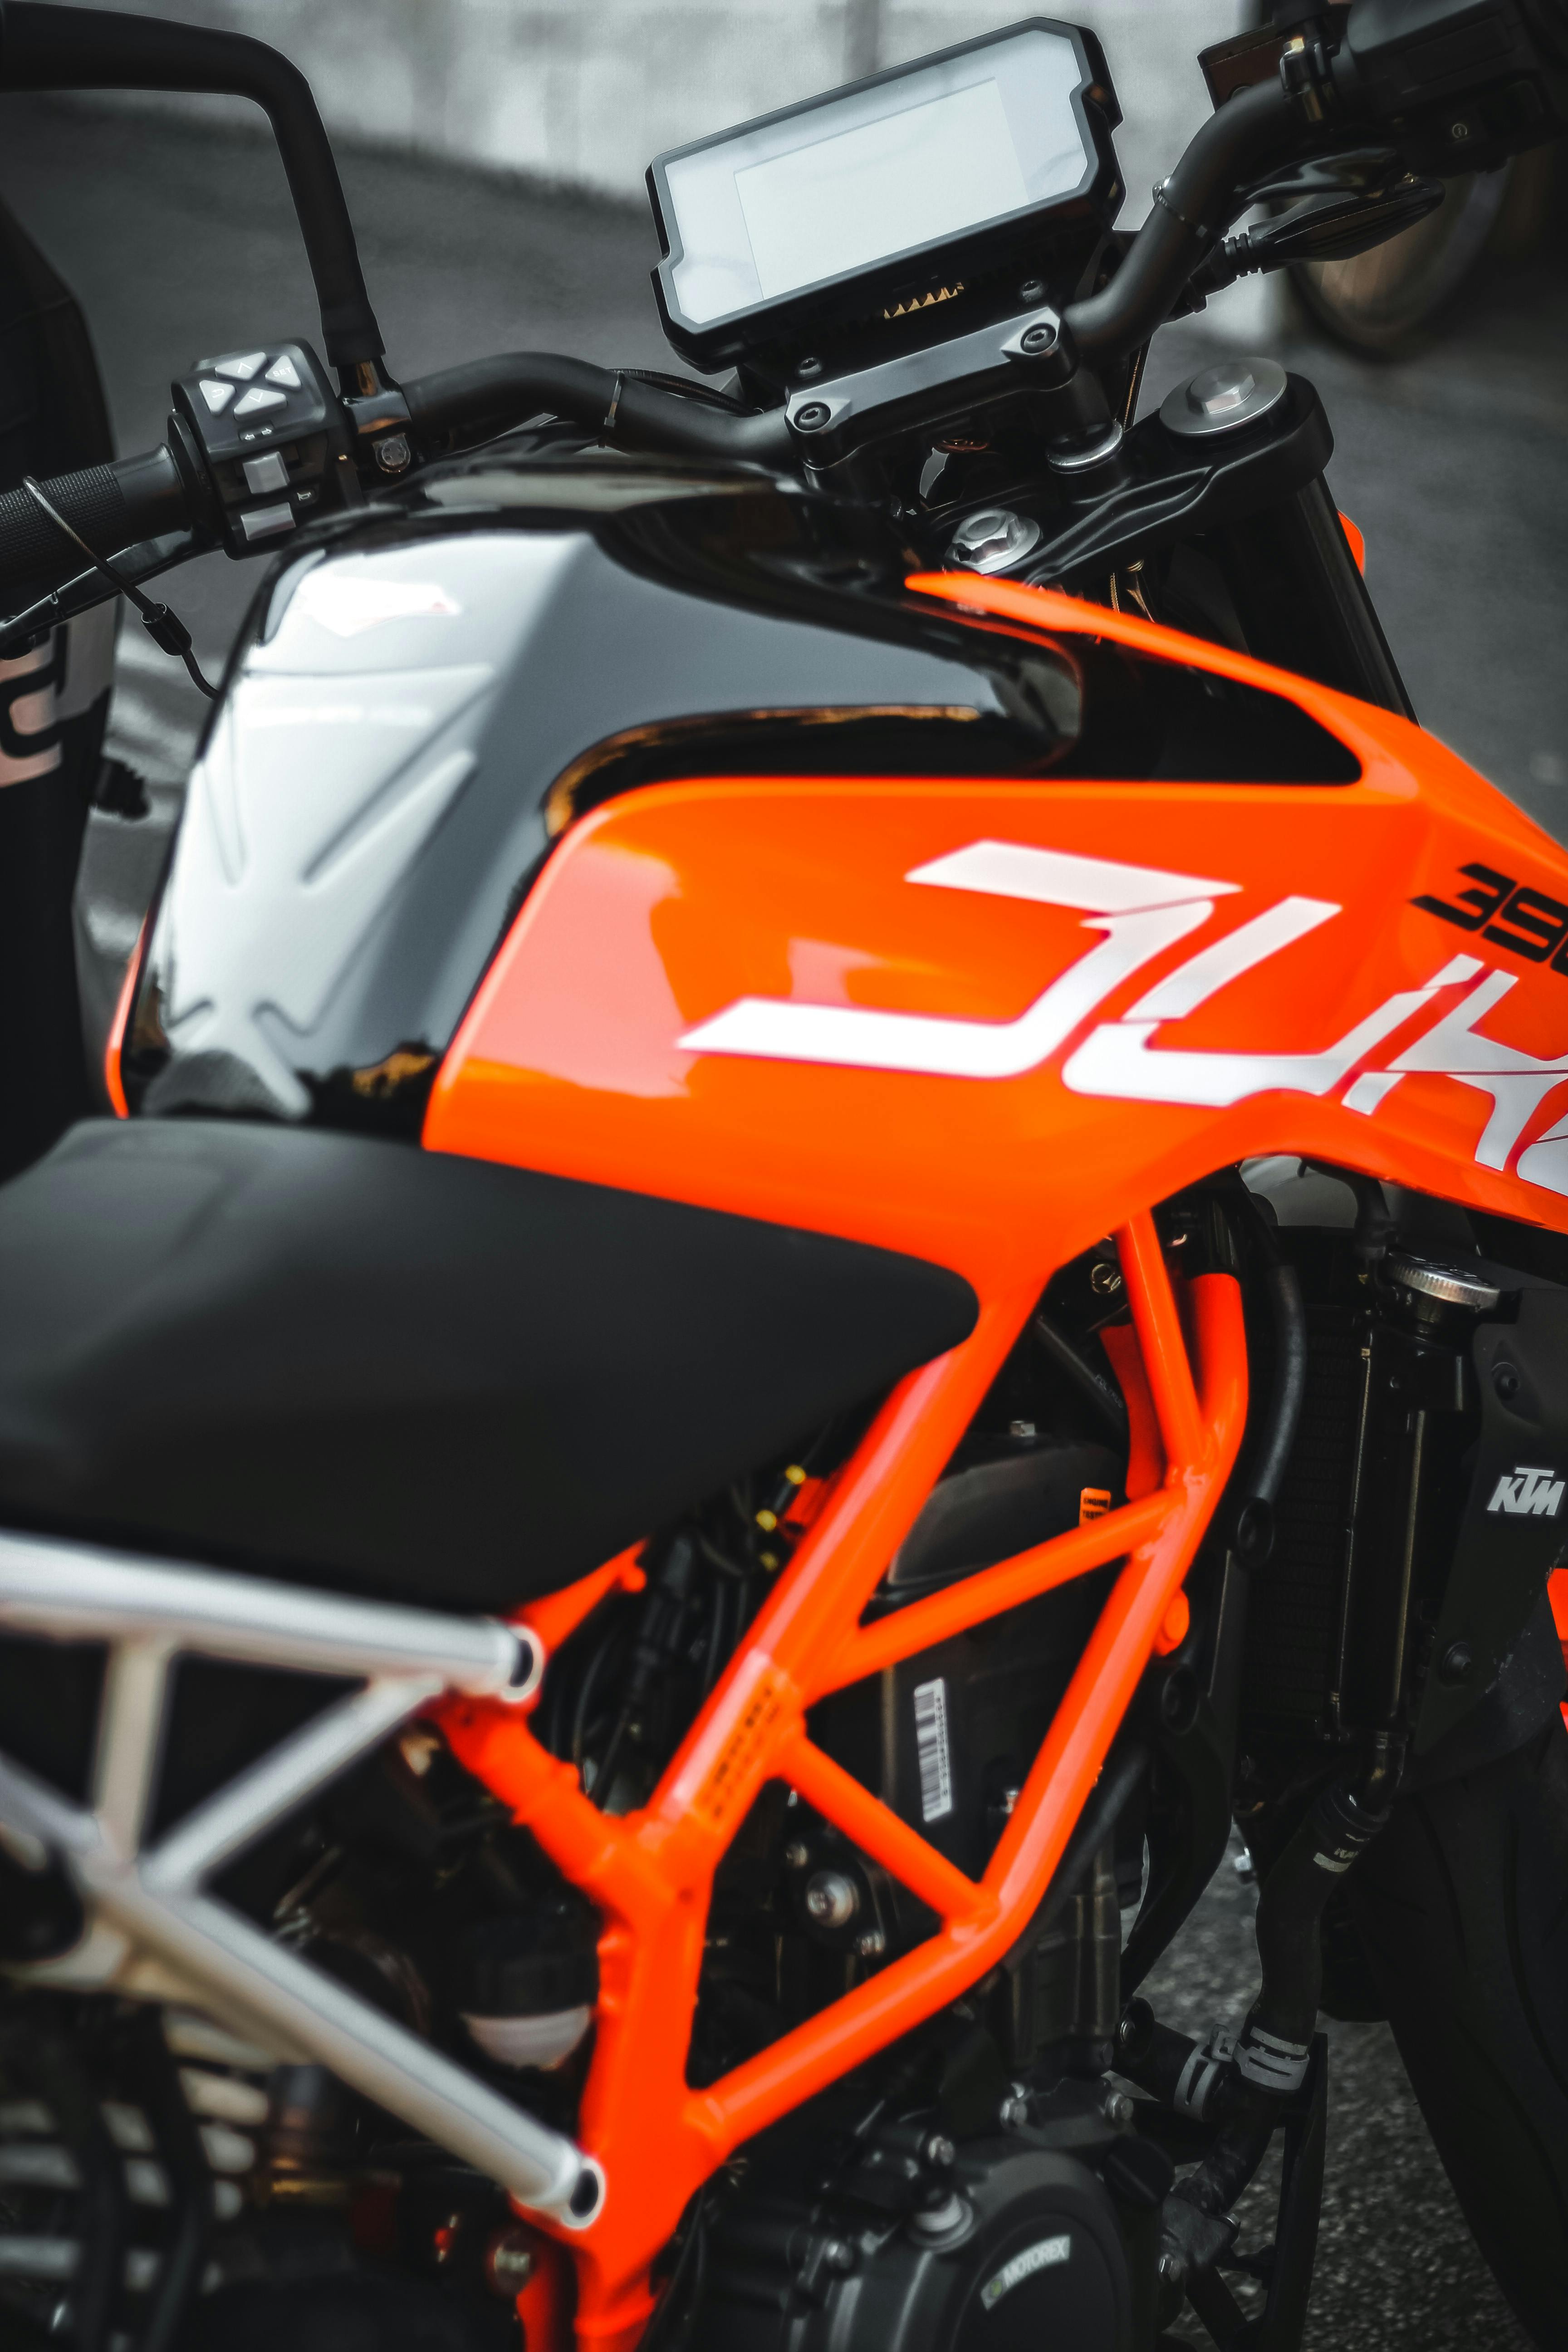 Ktm Photos, Download The BEST Free Ktm Stock Photos & HD Images